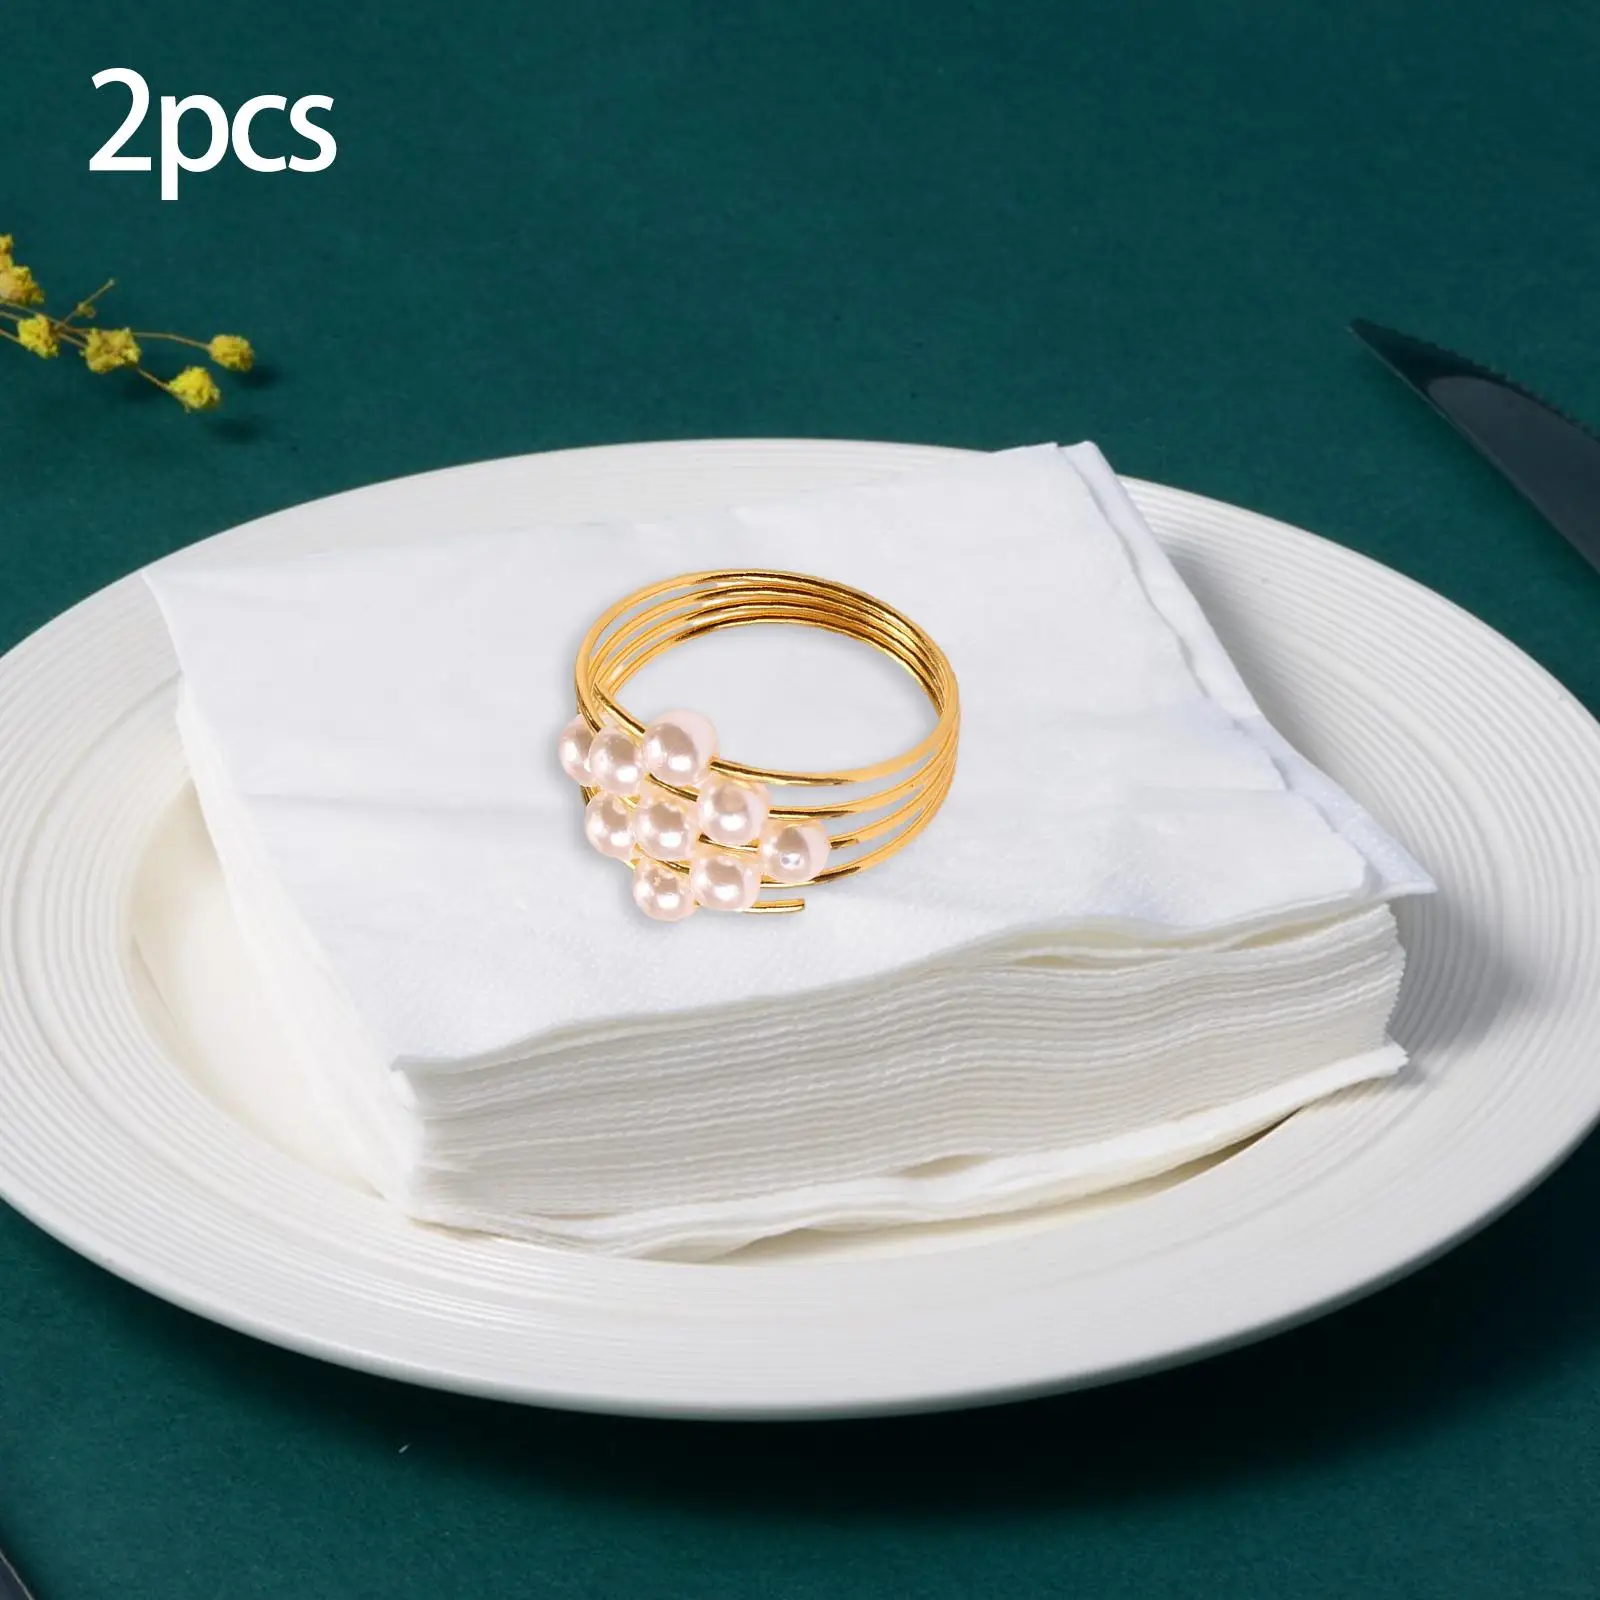 2x Metal Napkin Rings Holder Napkin Buckles Table Setting Decoration Pearls for Party Table Holiday Christmas Halloween